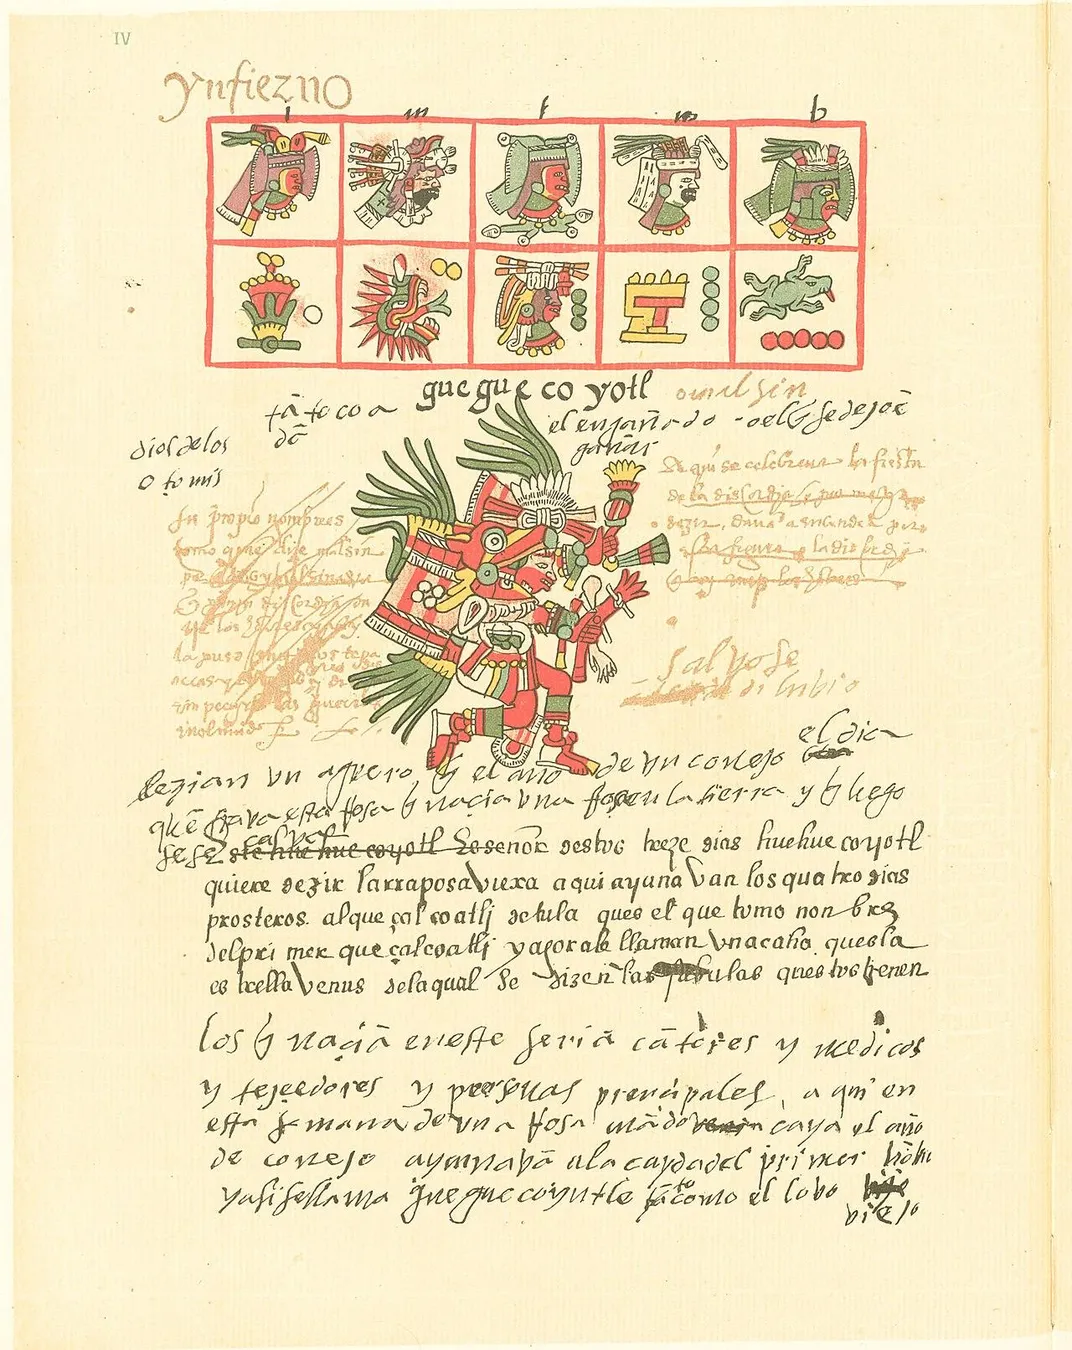 A page from the Codex Telleriano-Remensis